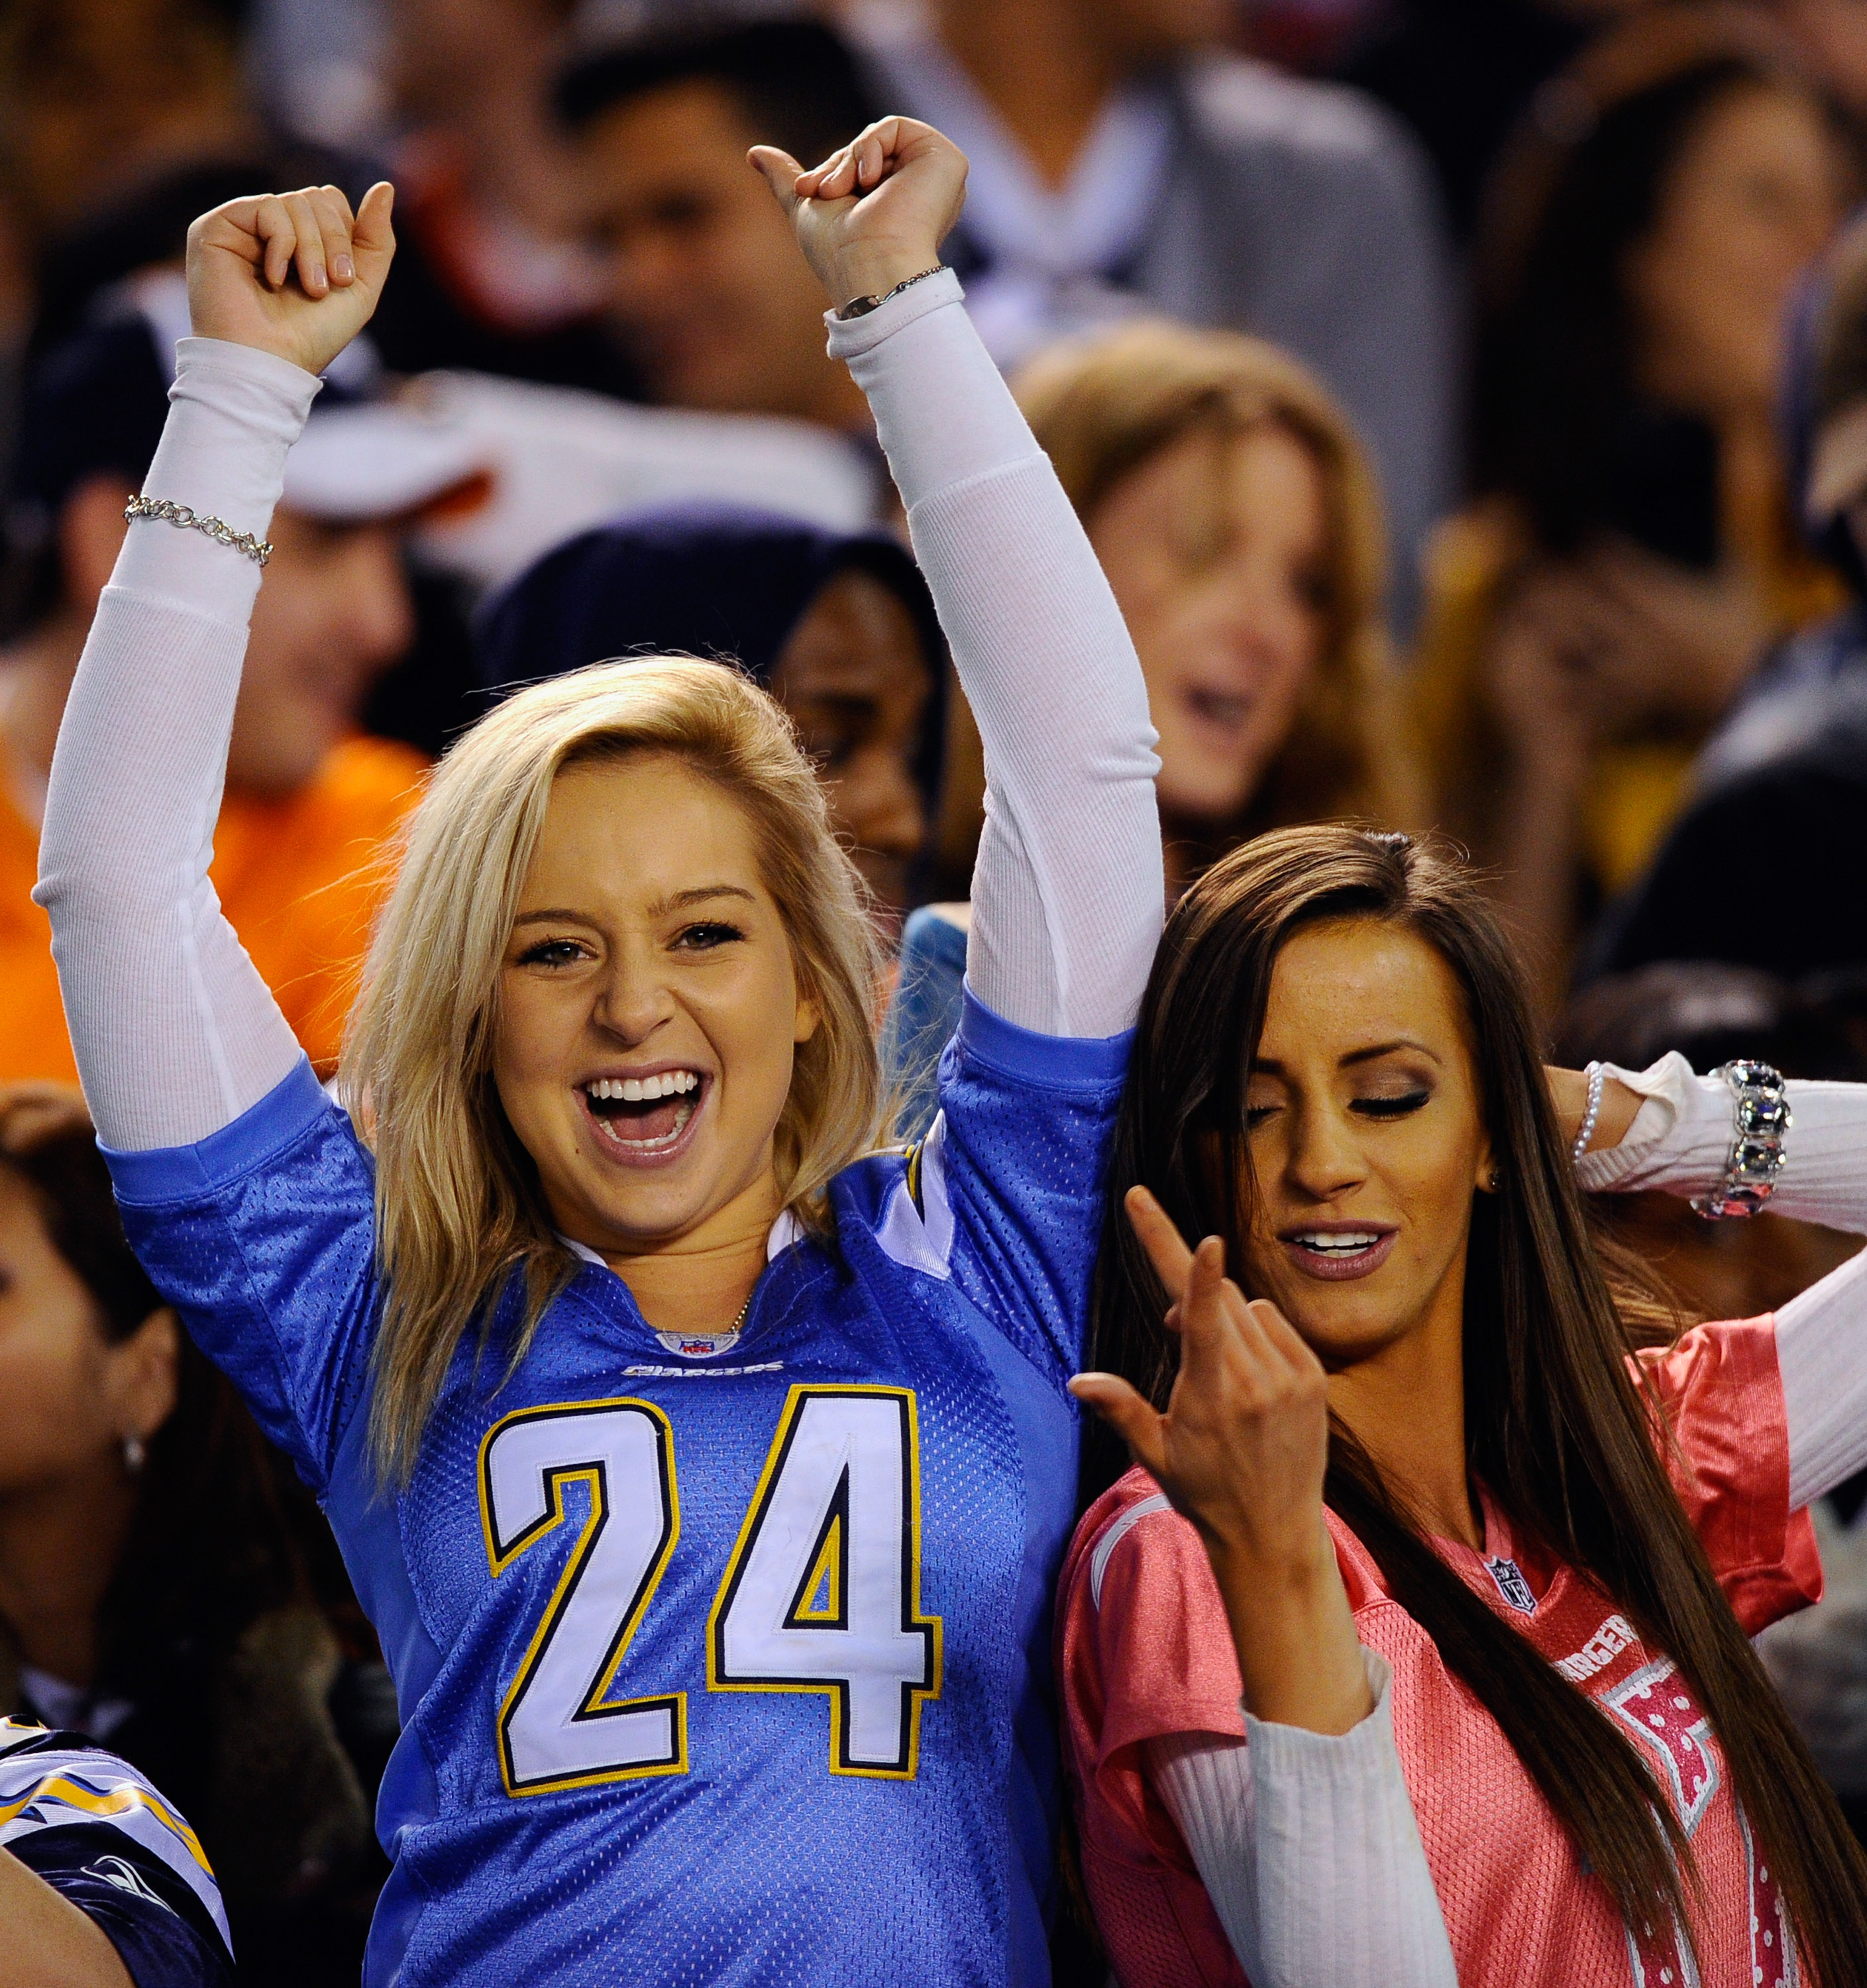 SAN DIEGO - NOVEMBER 22:  Fans of San Diego Chargers during the NFL football game against Denver Broncos at Qualcomm Stadium on November 22, 2010 in San Diego, California.  (Photo by Kevork Djansezian/Getty Images)